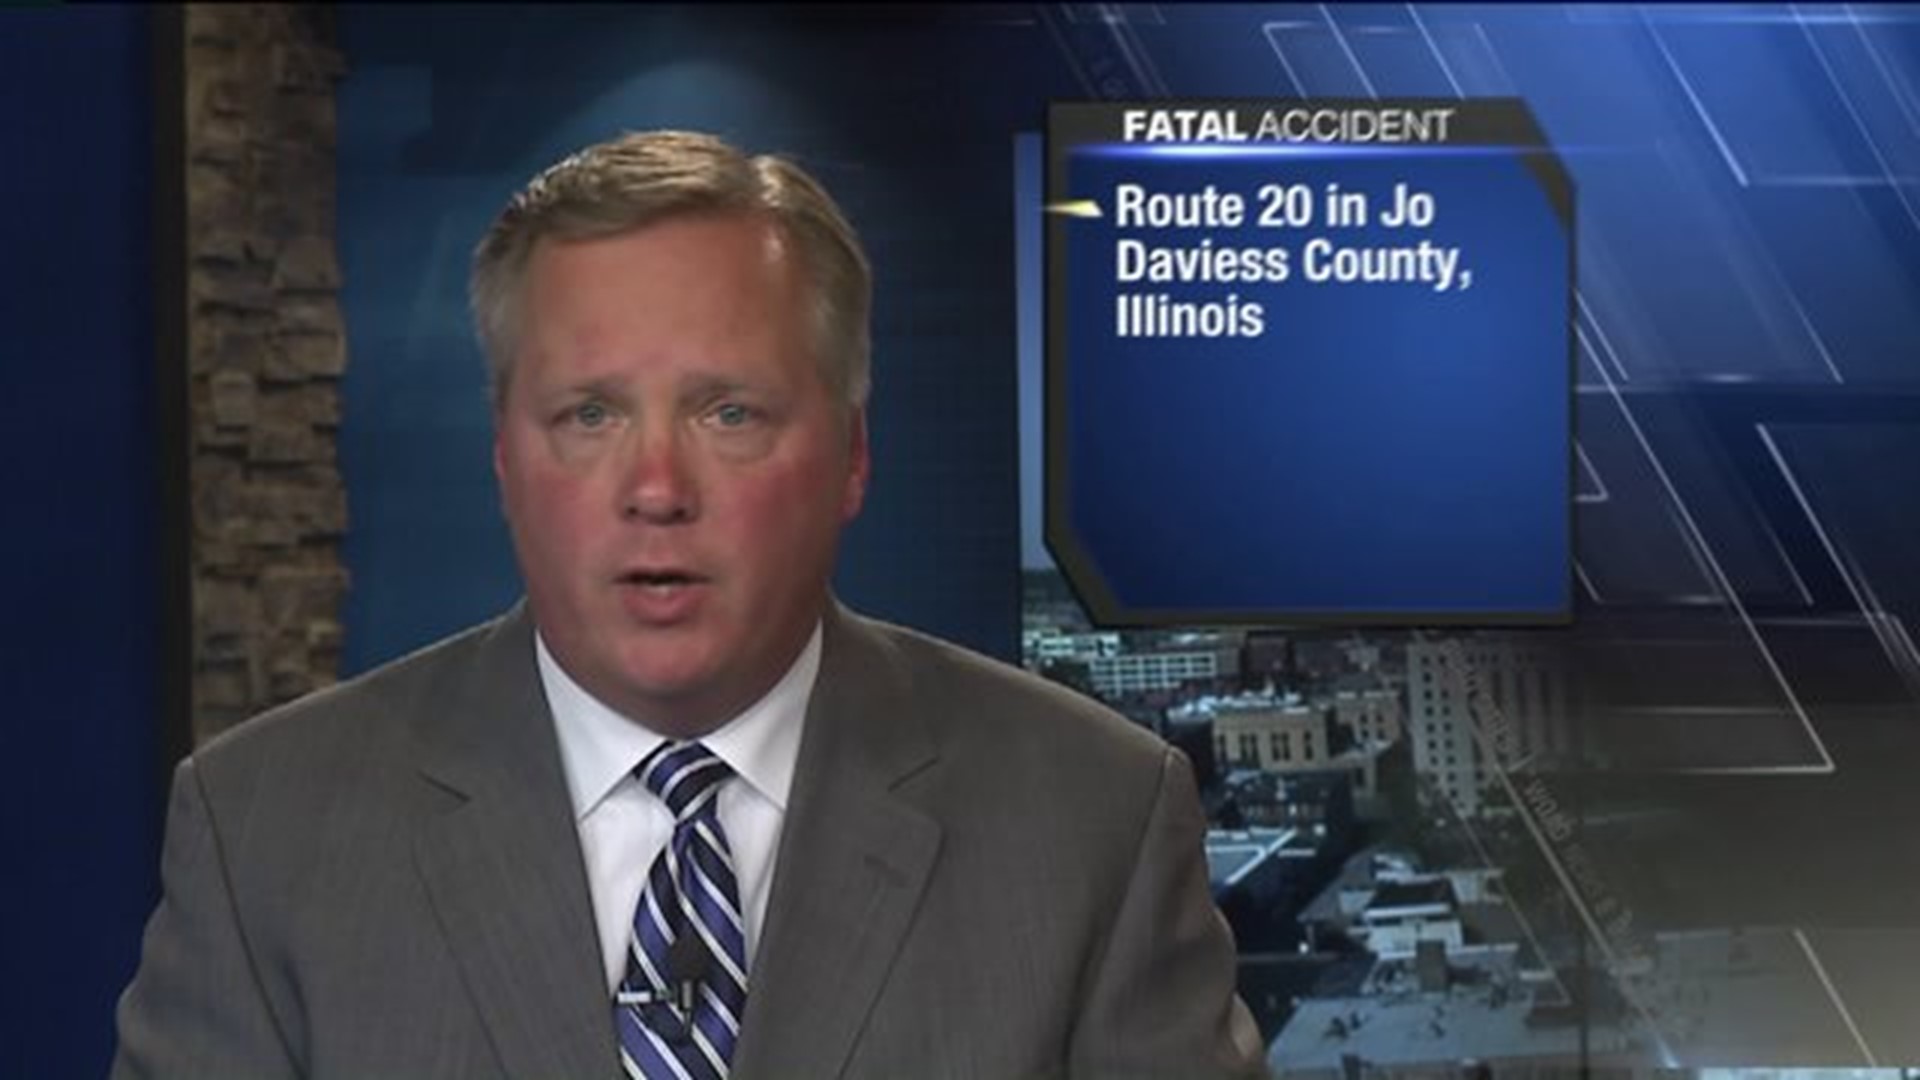 Four killed in crash on Route 20 in Jo Daviess County